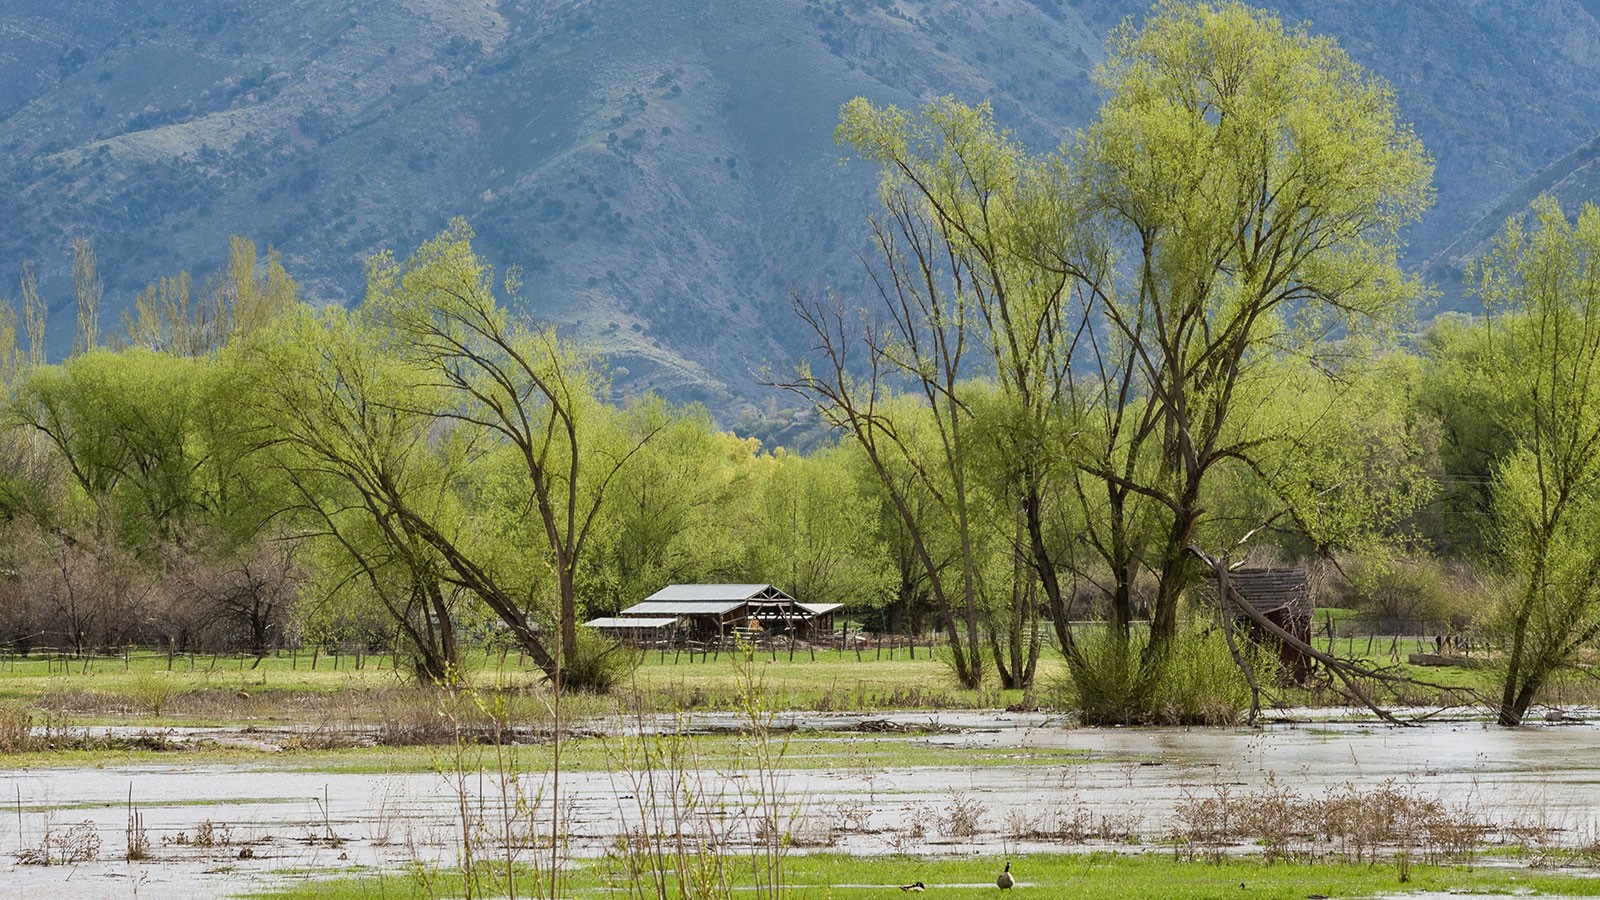 Flooded logan river with barn in the background. 